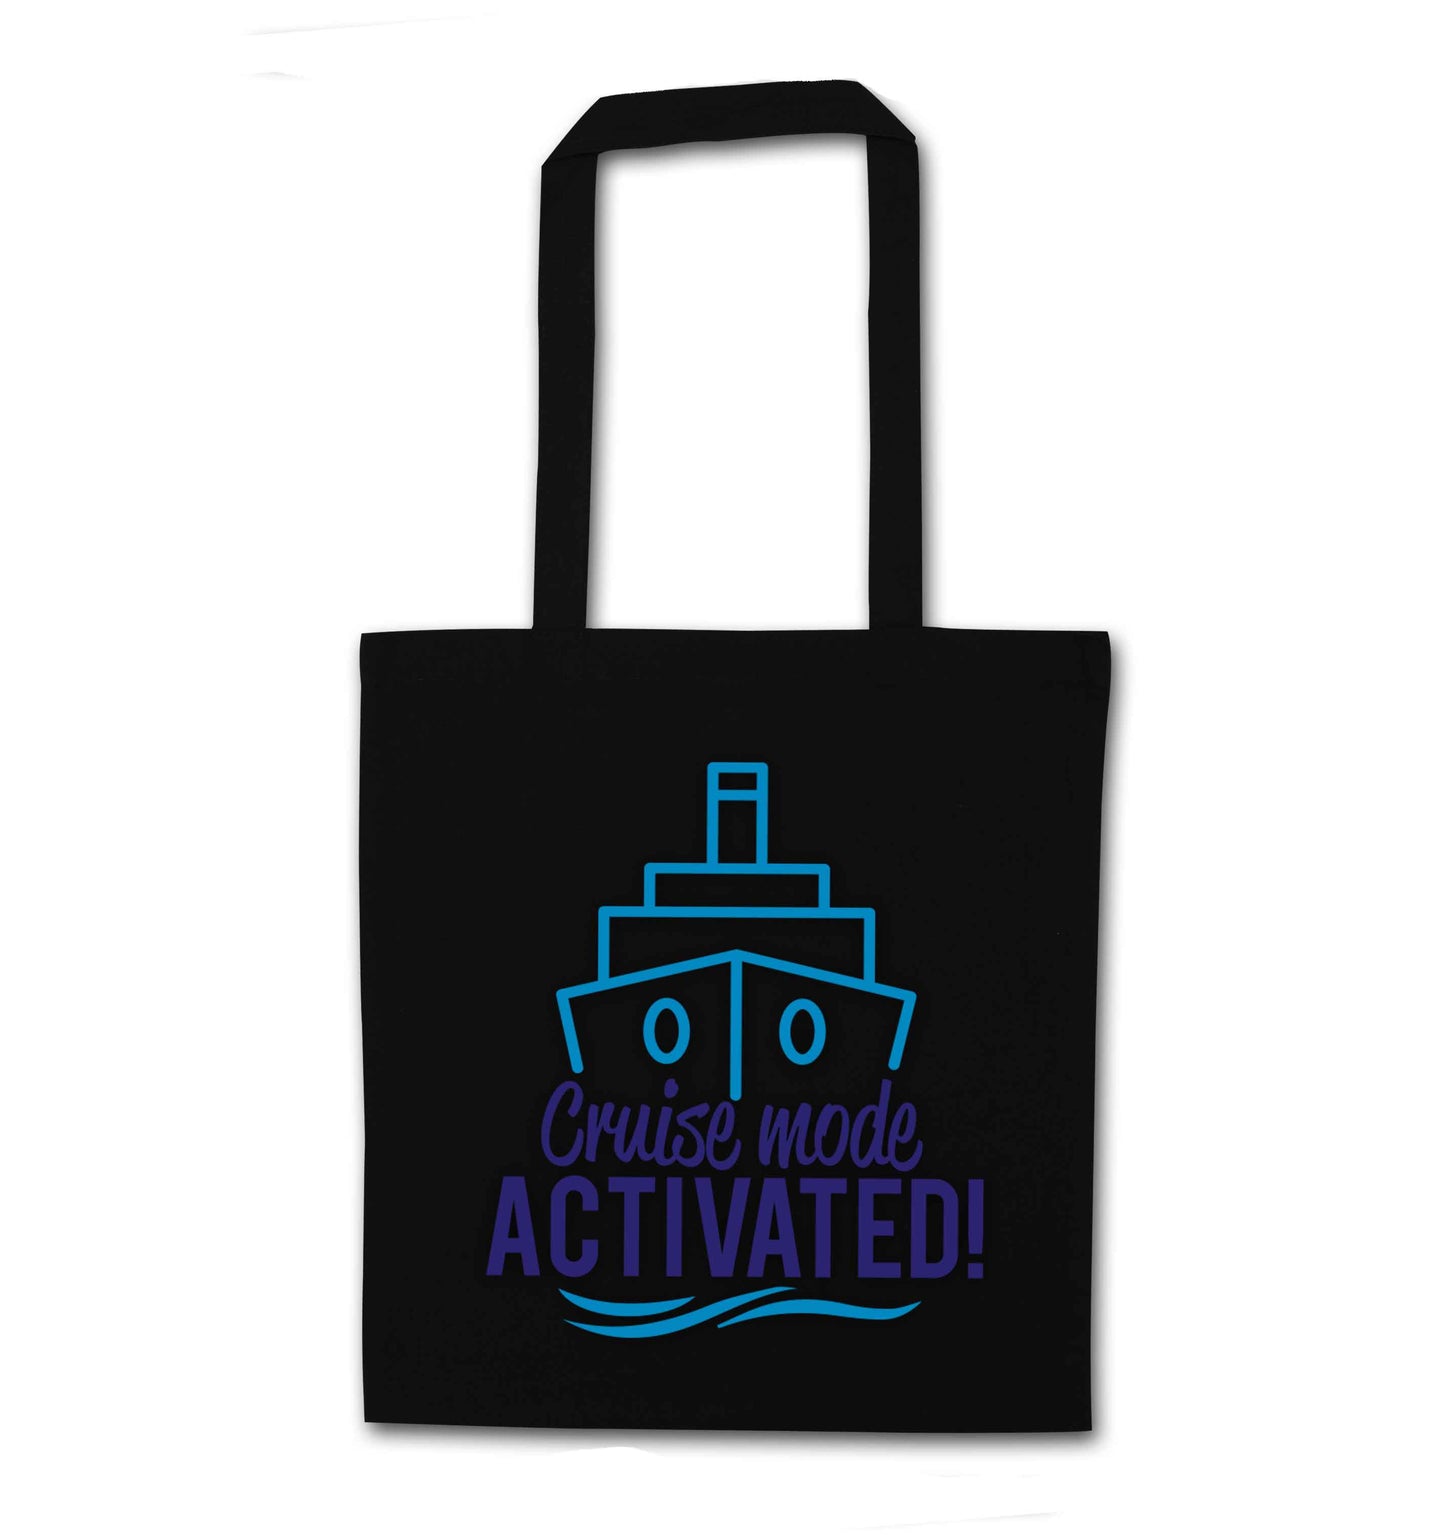 Cruise mode activated black tote bag